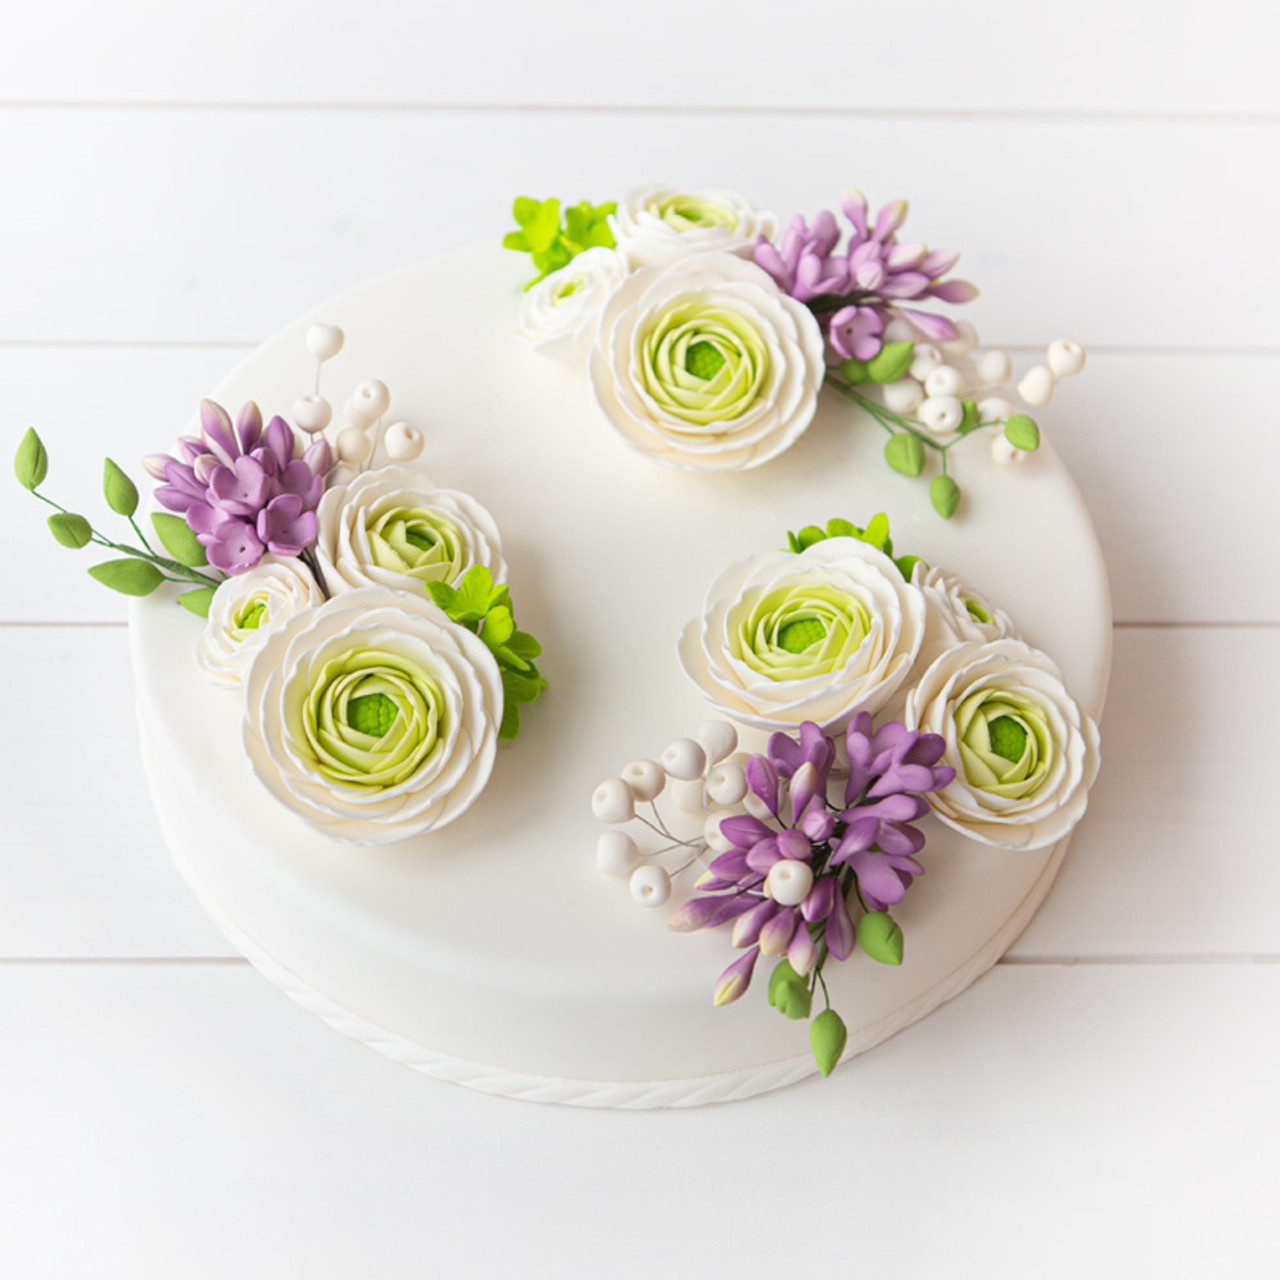 Example of a Cake you can create using the Ranunculus with the additional of other floral pieces.